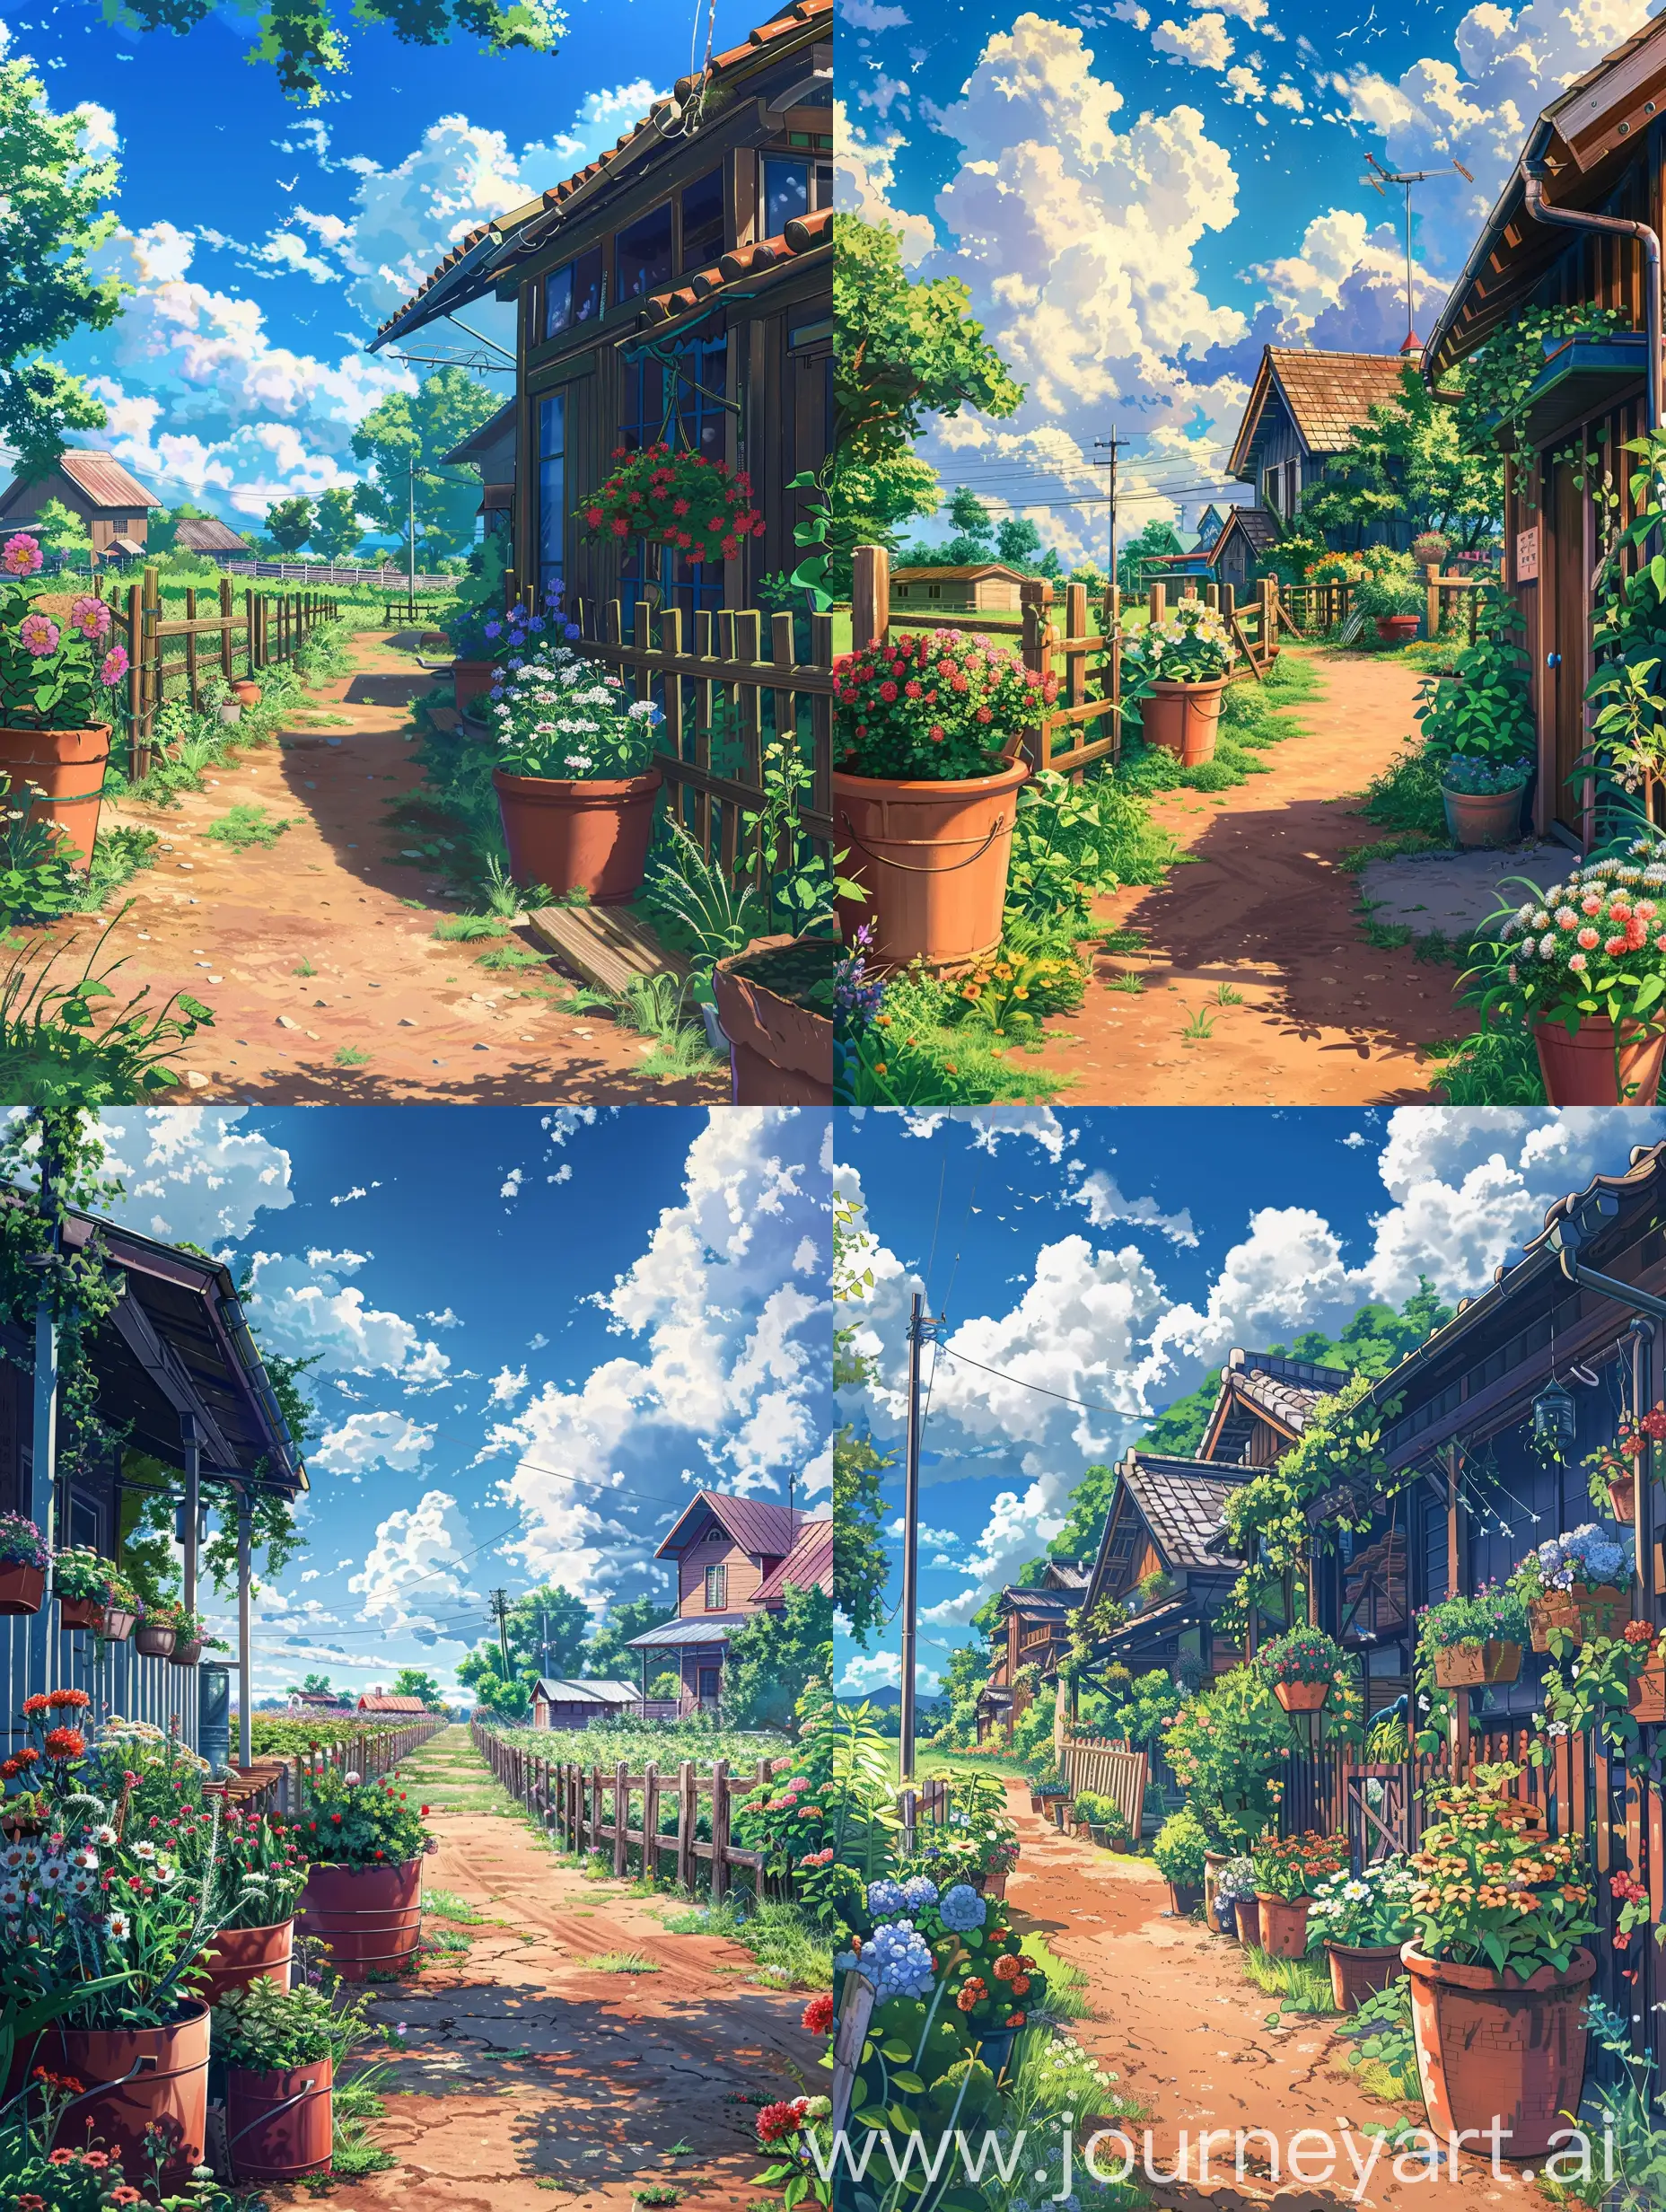 Beautiful anime style,Makato Shinkai style,a farm house front view view with high detailing,flower pots,plants pot,a farm can be seen on  the left side,beautiful days in summers,sky is beautiful,fluffy clouds,a  beautiful dirt path,beautiful fences covering the farm house,mix the scene with nature beauty.